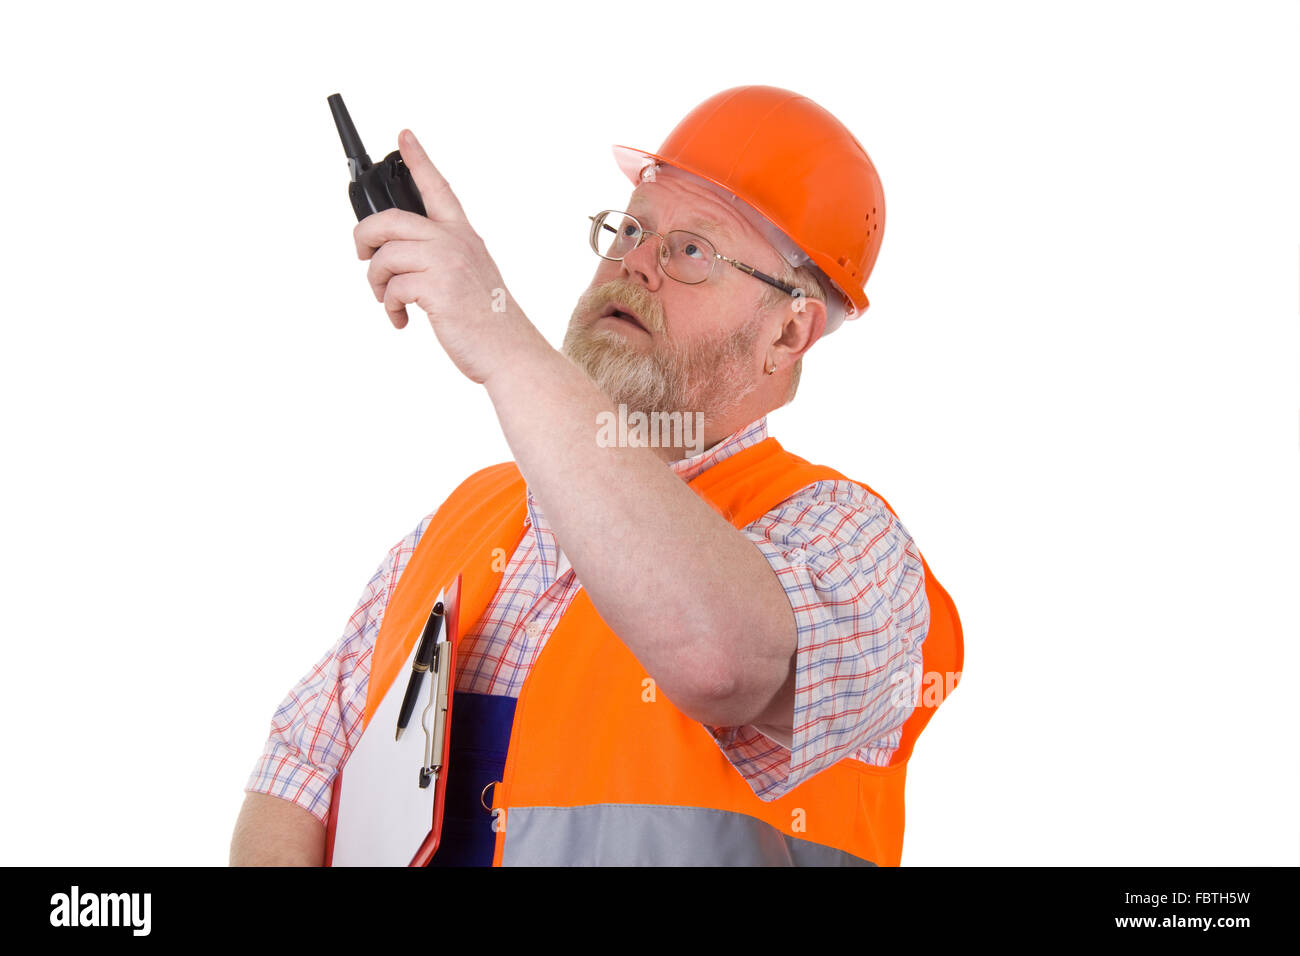 Construction supervisor with walkie talkie Stock Photo